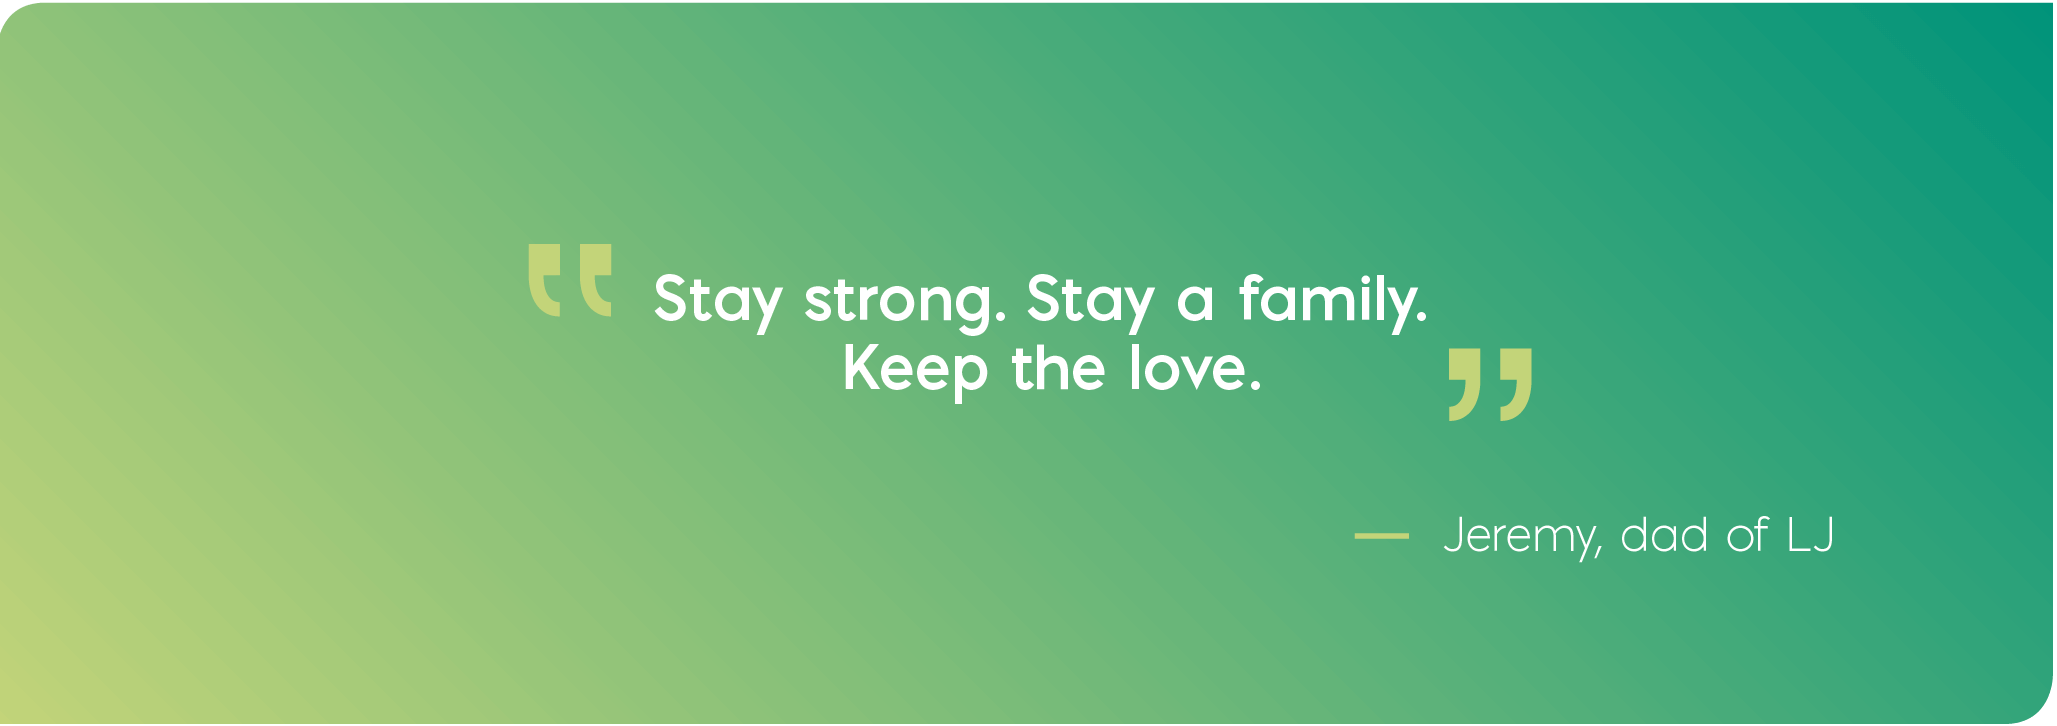 Stay strong. Stay a family. Keep the love. Quote from Jeremy, dad of LJ